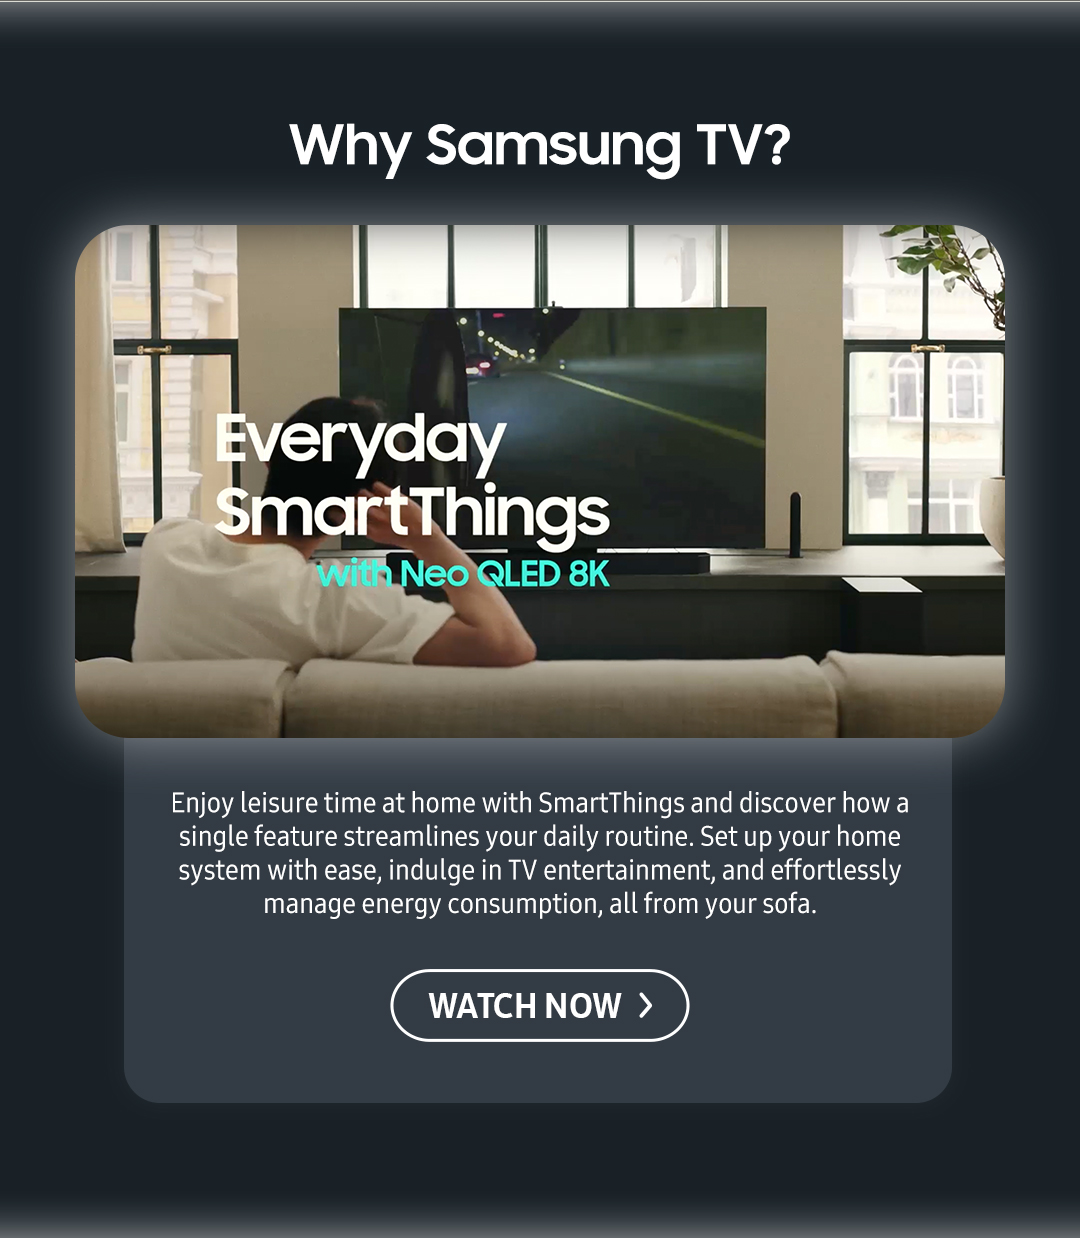 Why Samsung TV? Enjoy leisure time at home with SmartThings and discover how a single feature streamlines your daily routine. Set up your home system with ease, indulge in TV entertainment, and effortlessly manage energy consumption, all from your sofa.